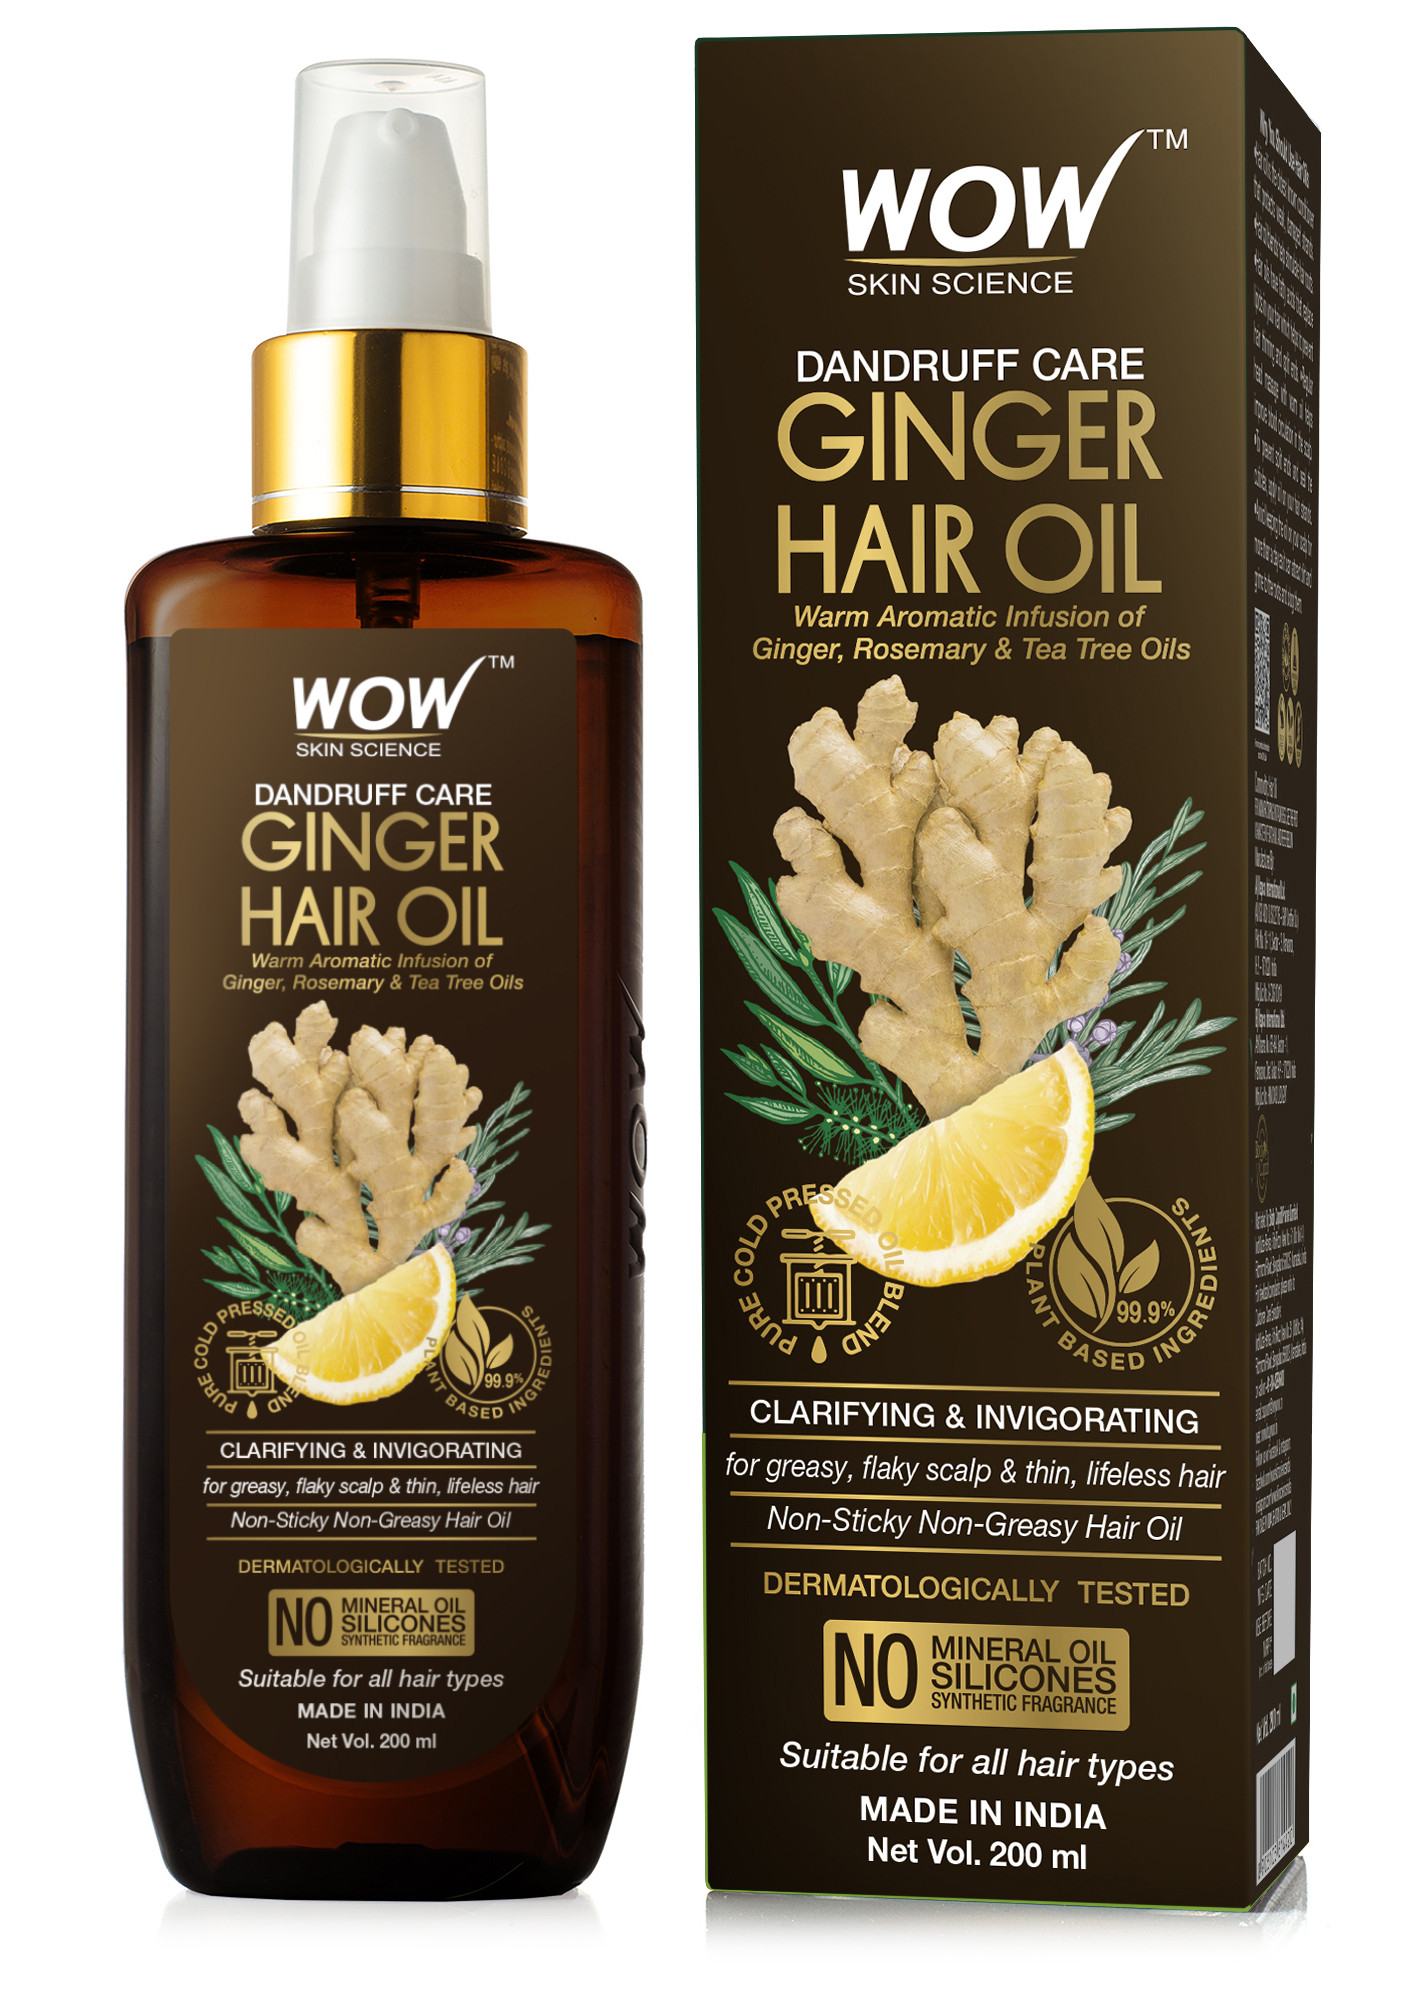 WOW Skin Science Dandruff Care Ginger Hair Oil - for Dandruff Care - for All Hair Types - Non-Sticky & Non-Greasy Hair Oil - No Mineral Oil, Silicones, Synthetic Fragrance - 200mL